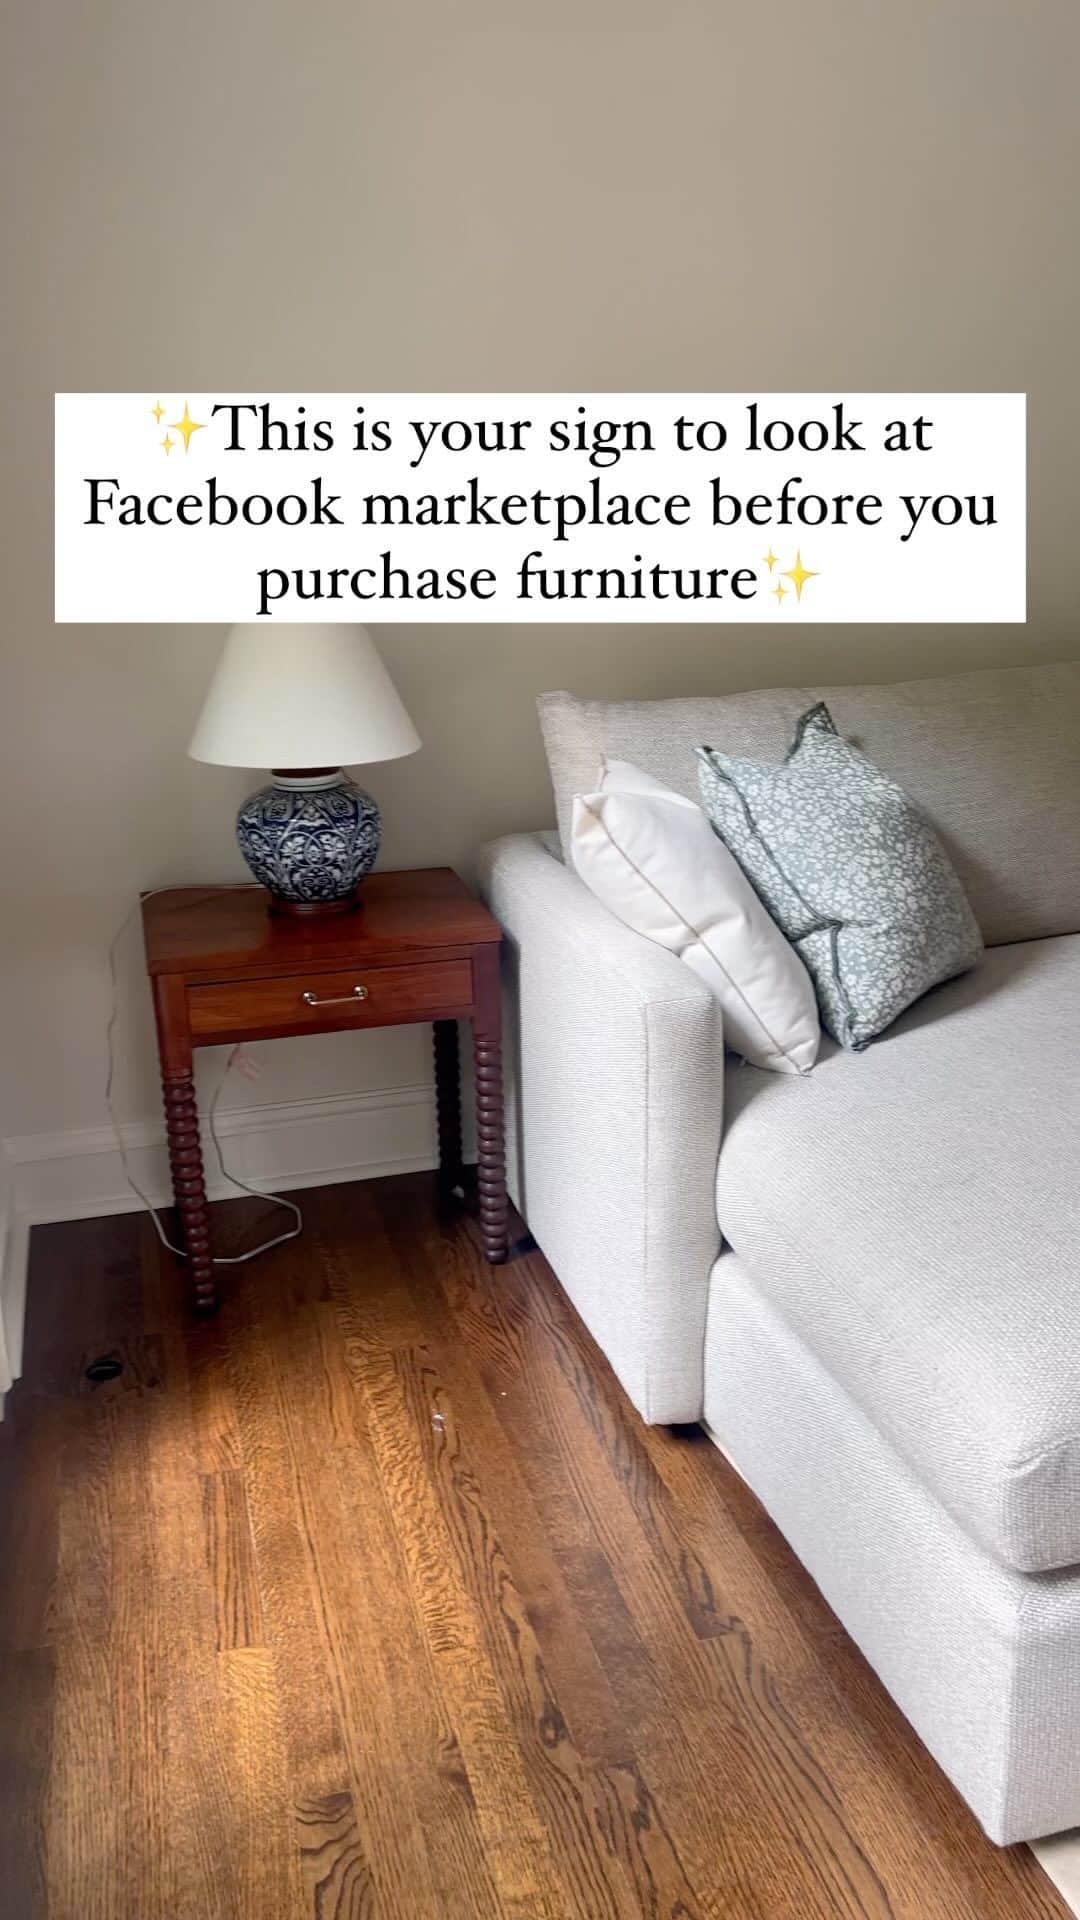 Anna Jane Wisniewskiのインスタグラム：「I’m addicted to looking at Facebook marketplace. Here are some tips: - be patient!  - save items that are your style even if you won’t buy them (it trains the algorithm) - expand your search perimeter - people can ship sometimes!  #thisoldhouse #facebookmarketplace #buyvintage」